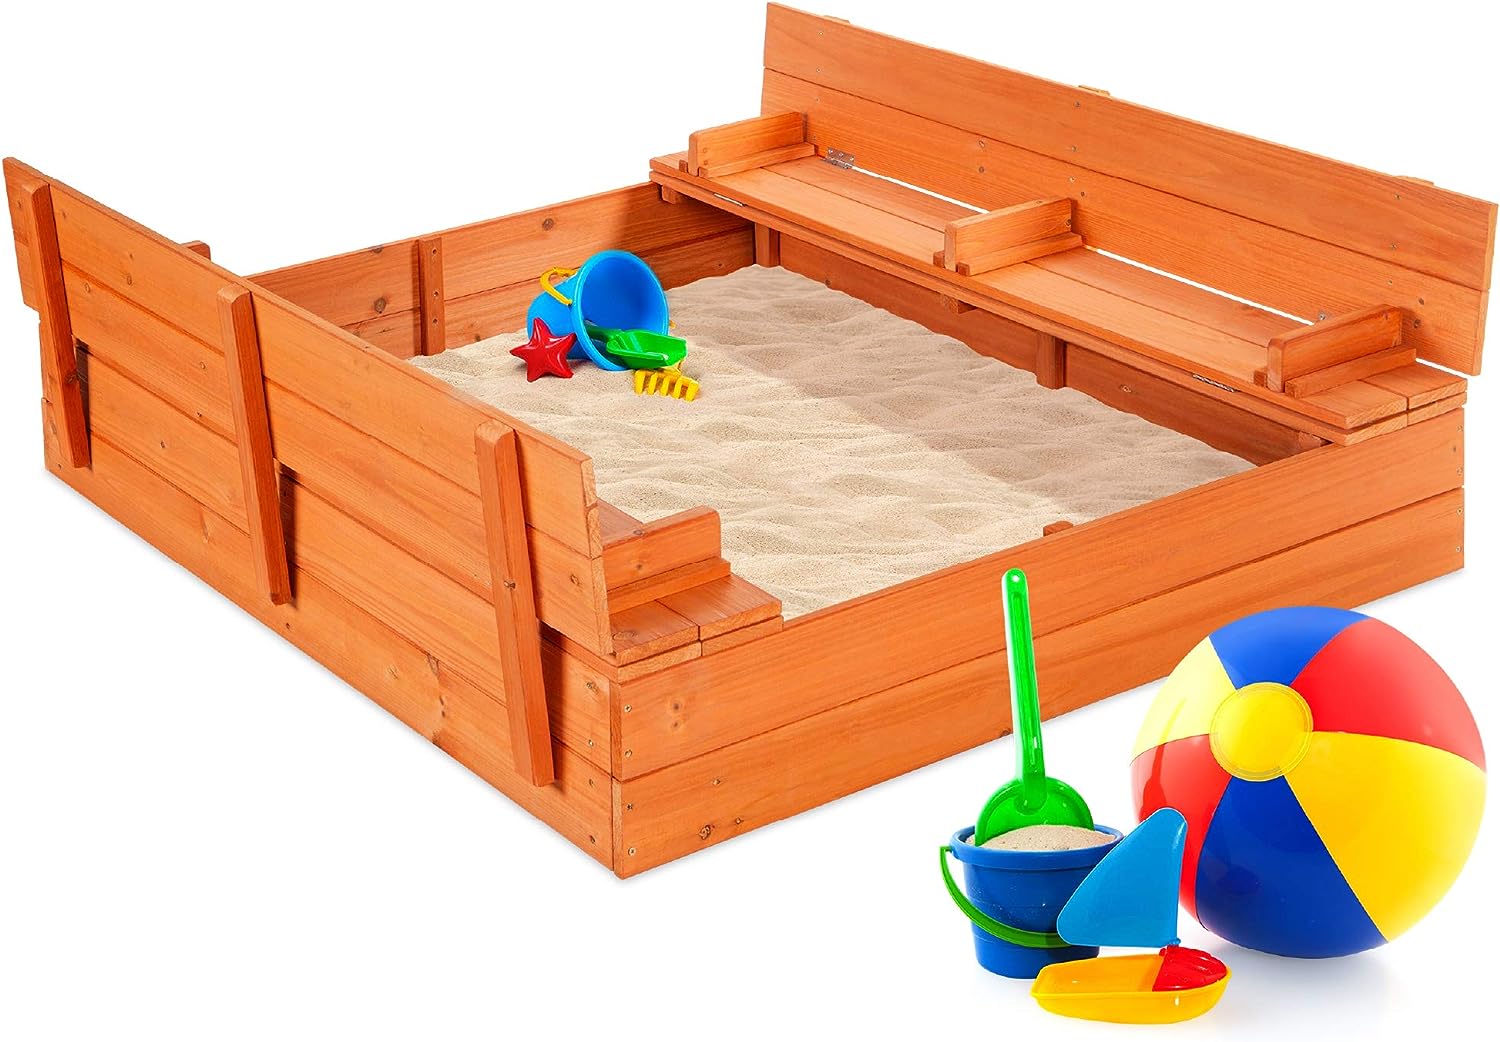 Best Choice Products 47x47in Kids Large Wooden Sandbox [...]